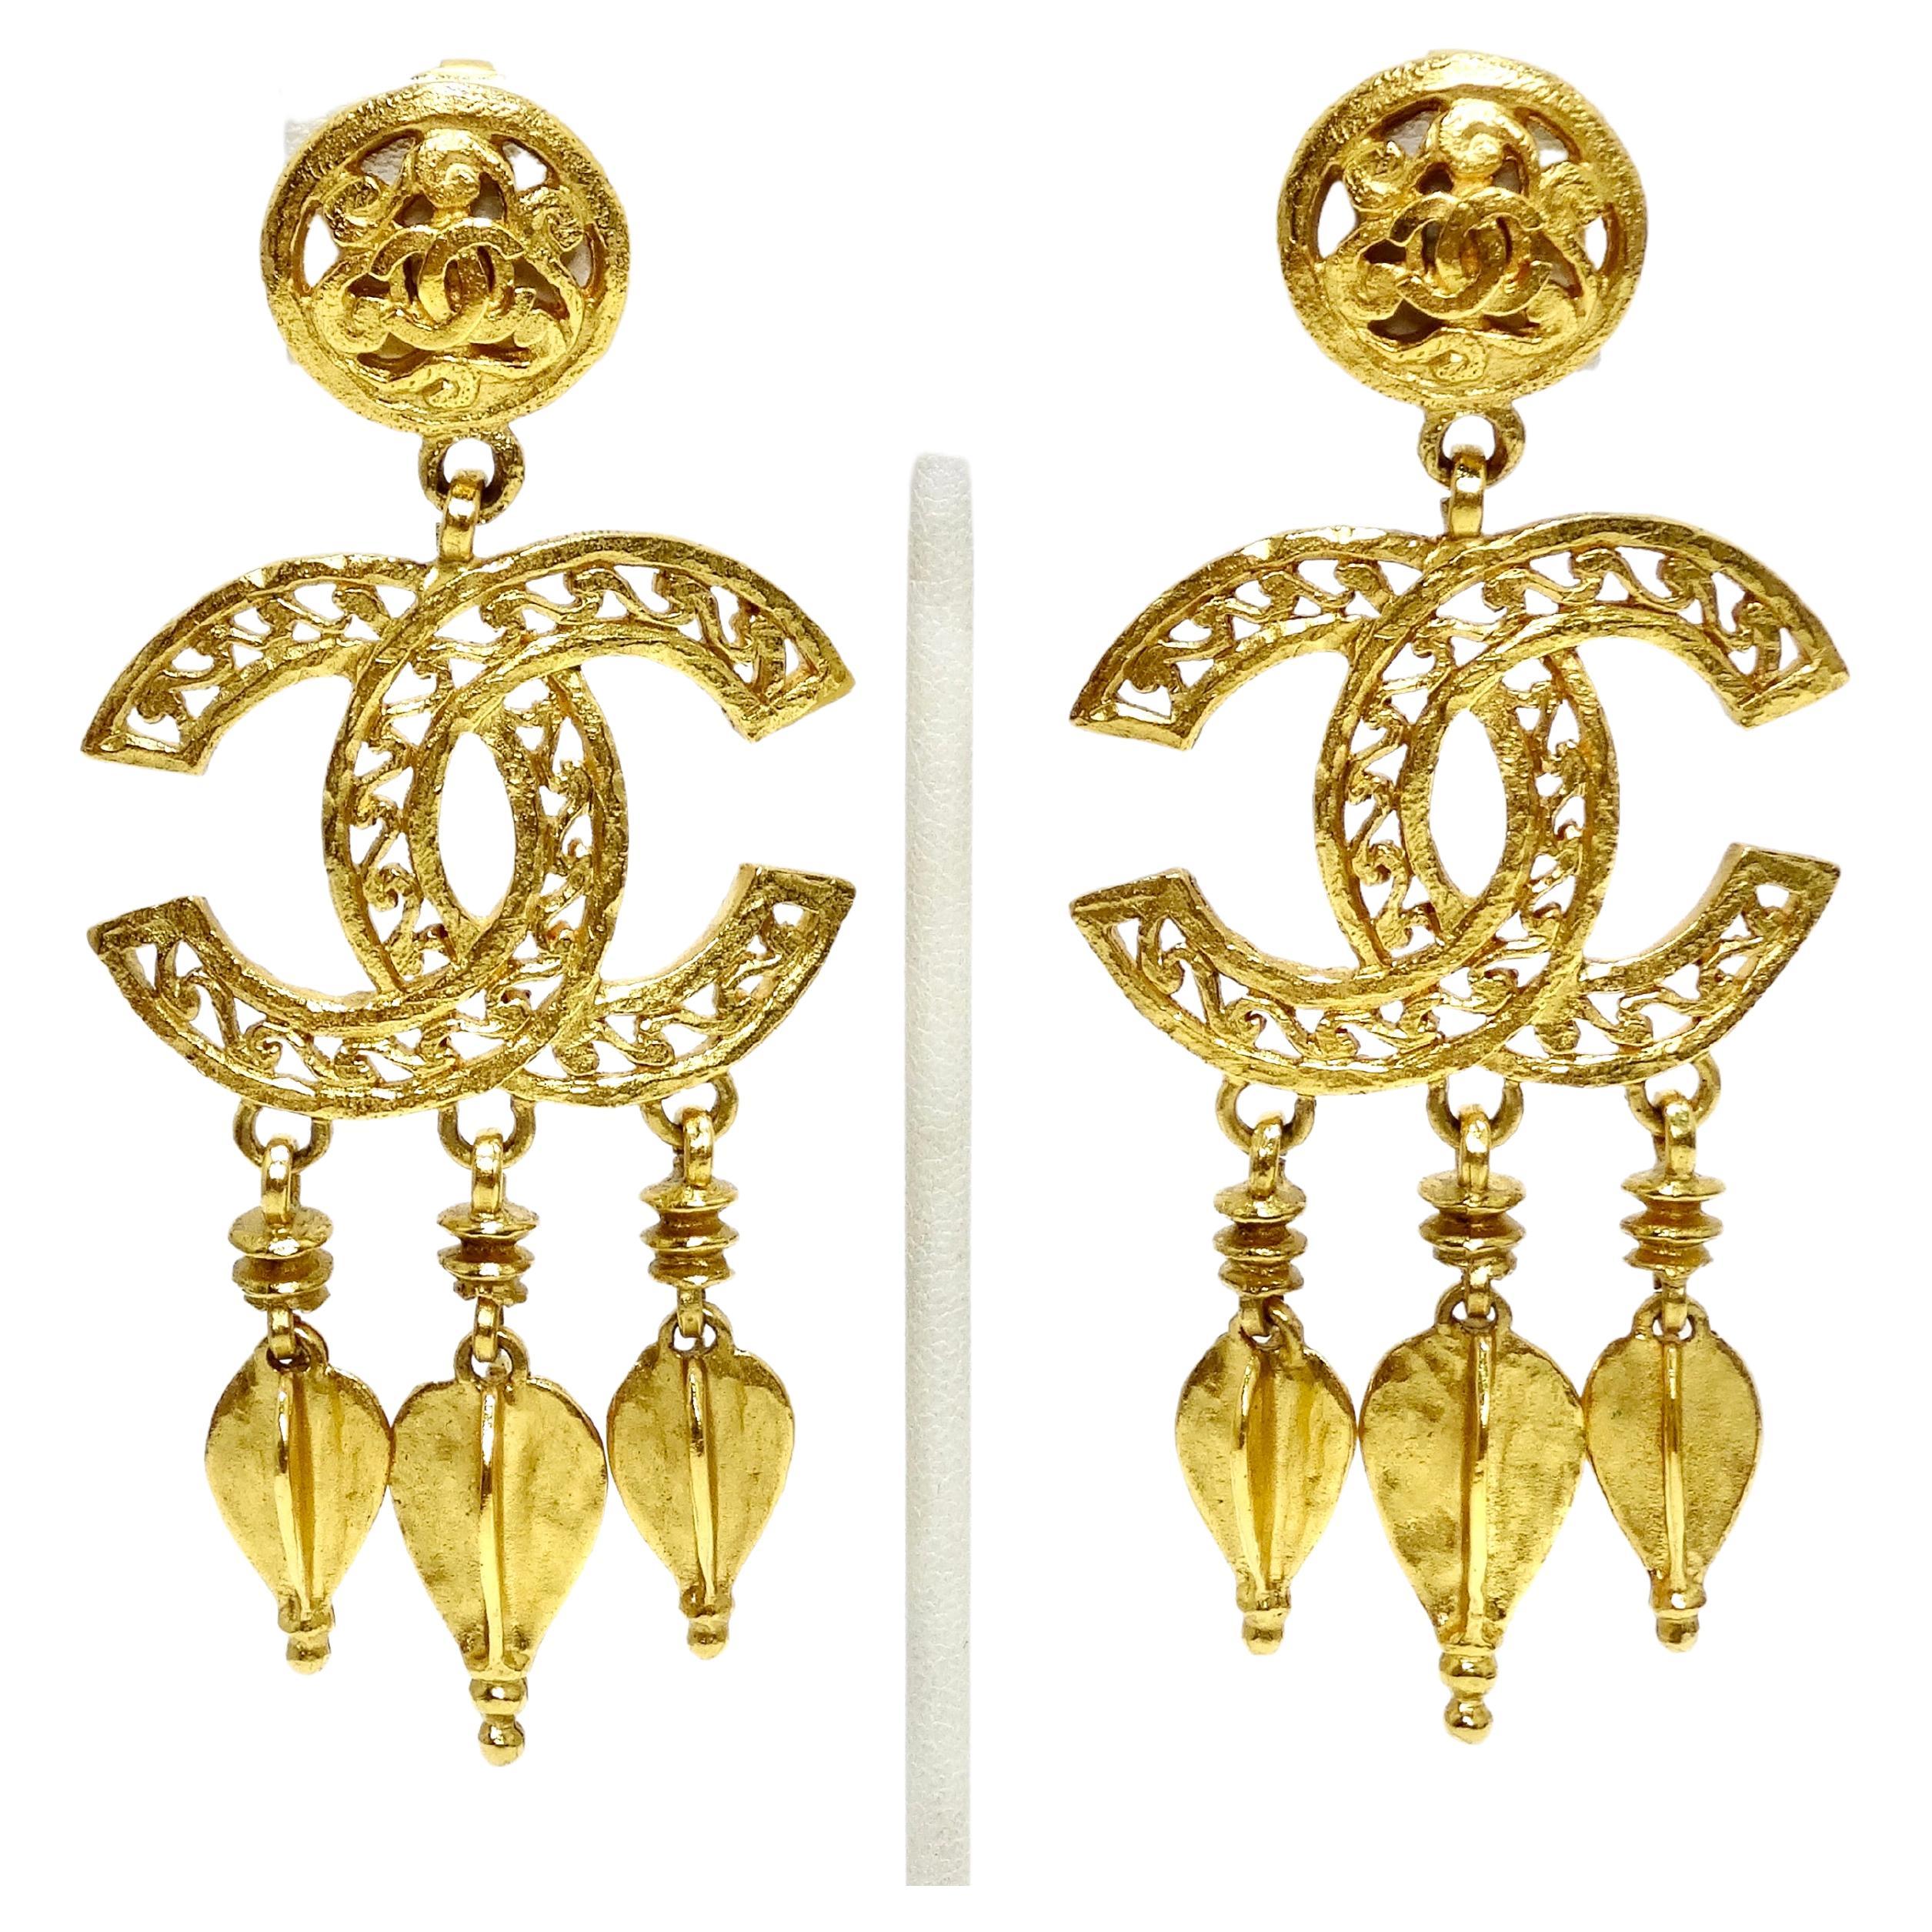 These are a rare pair of Chanel earrings that includes a load of ornate details. It features a large 